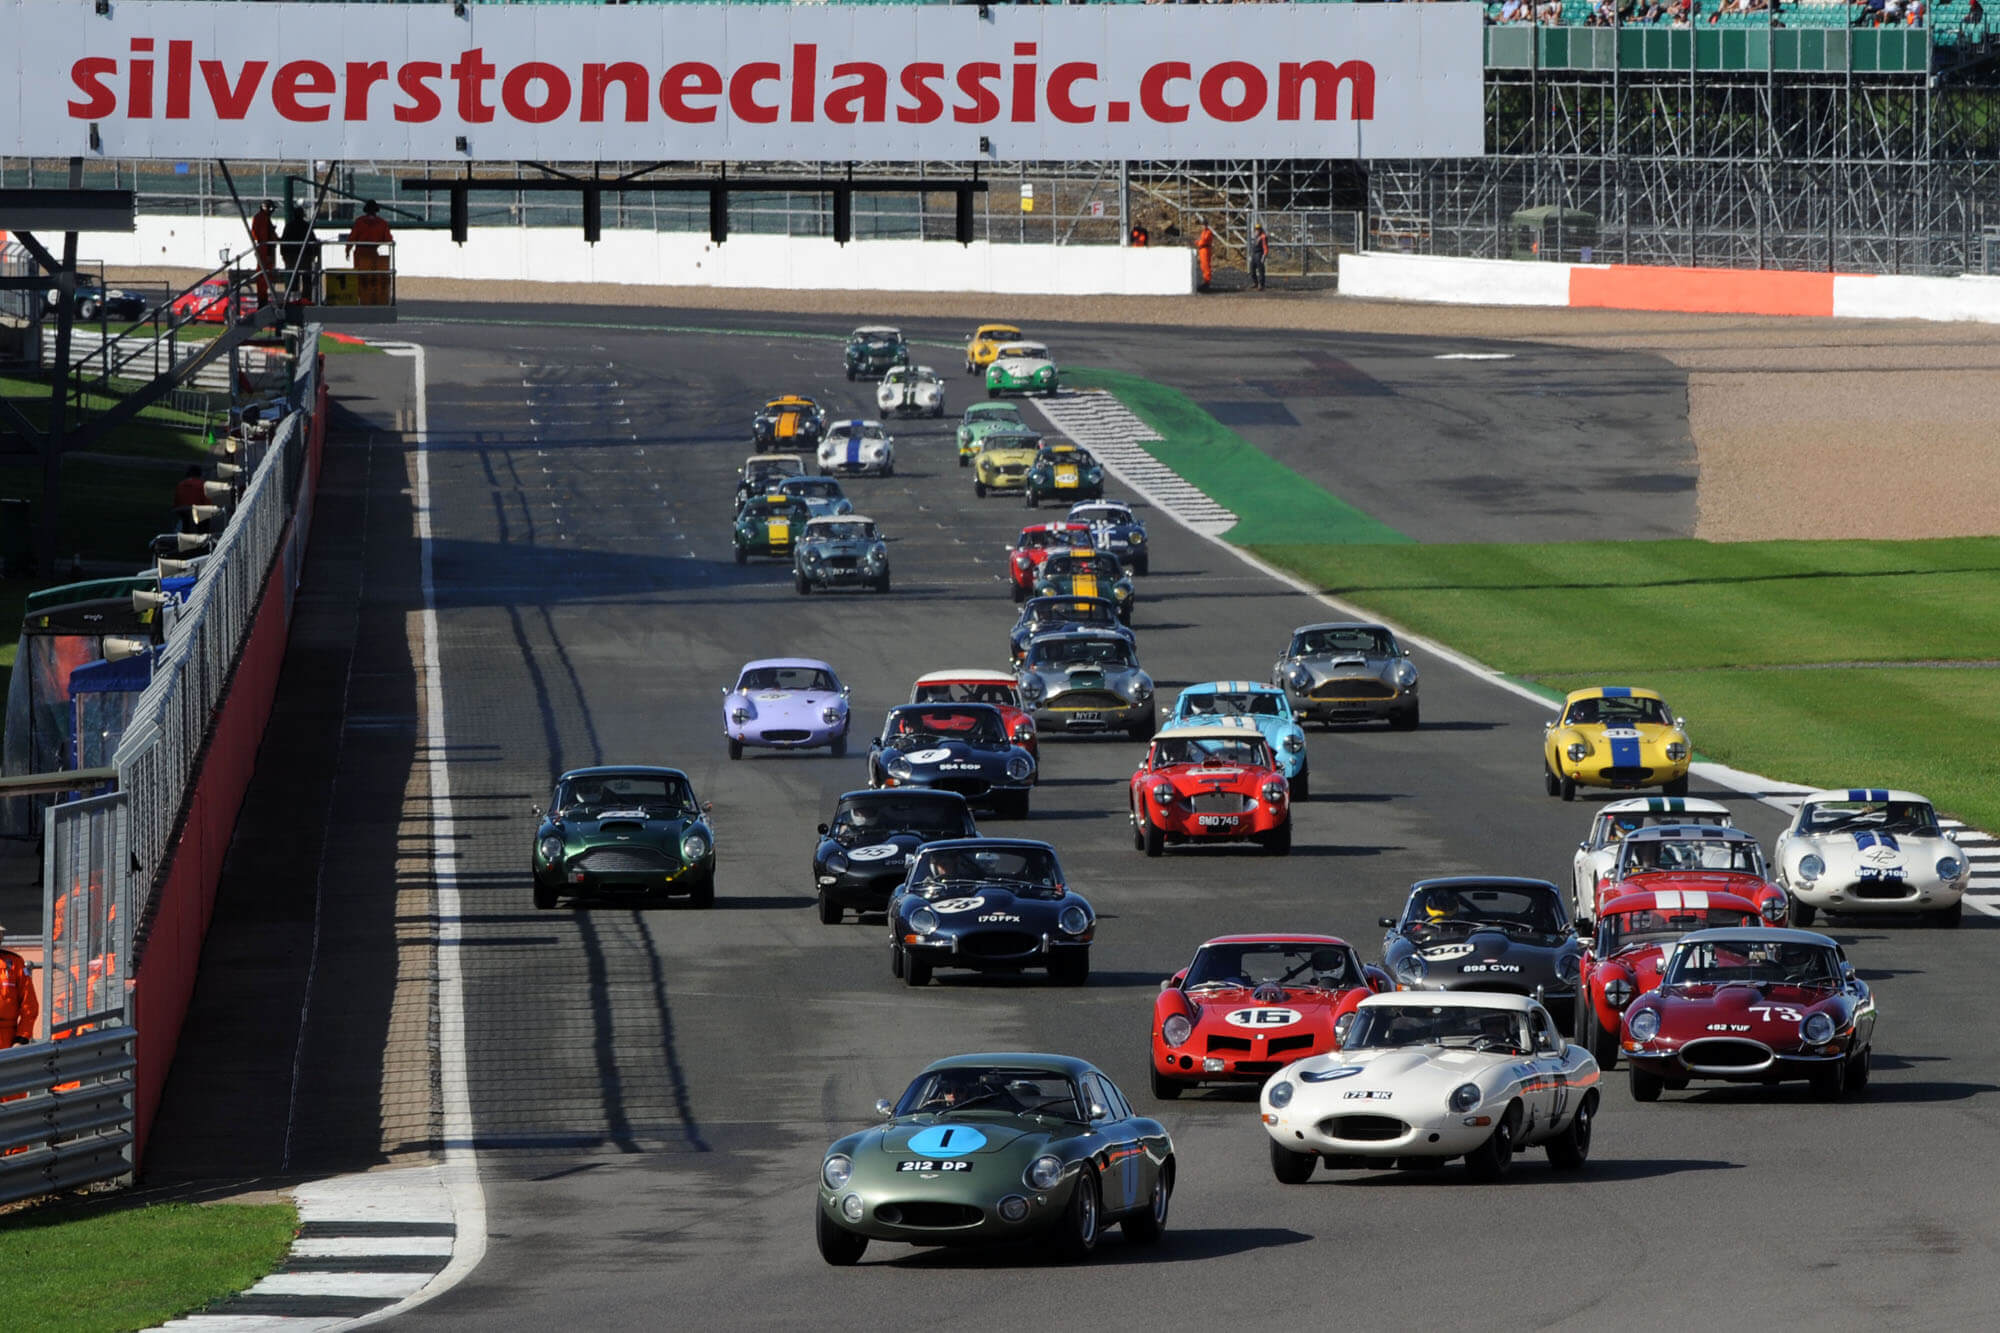 Classic race cars taking part in the RAC Tourist Trophy at The Classic at Silverstone 